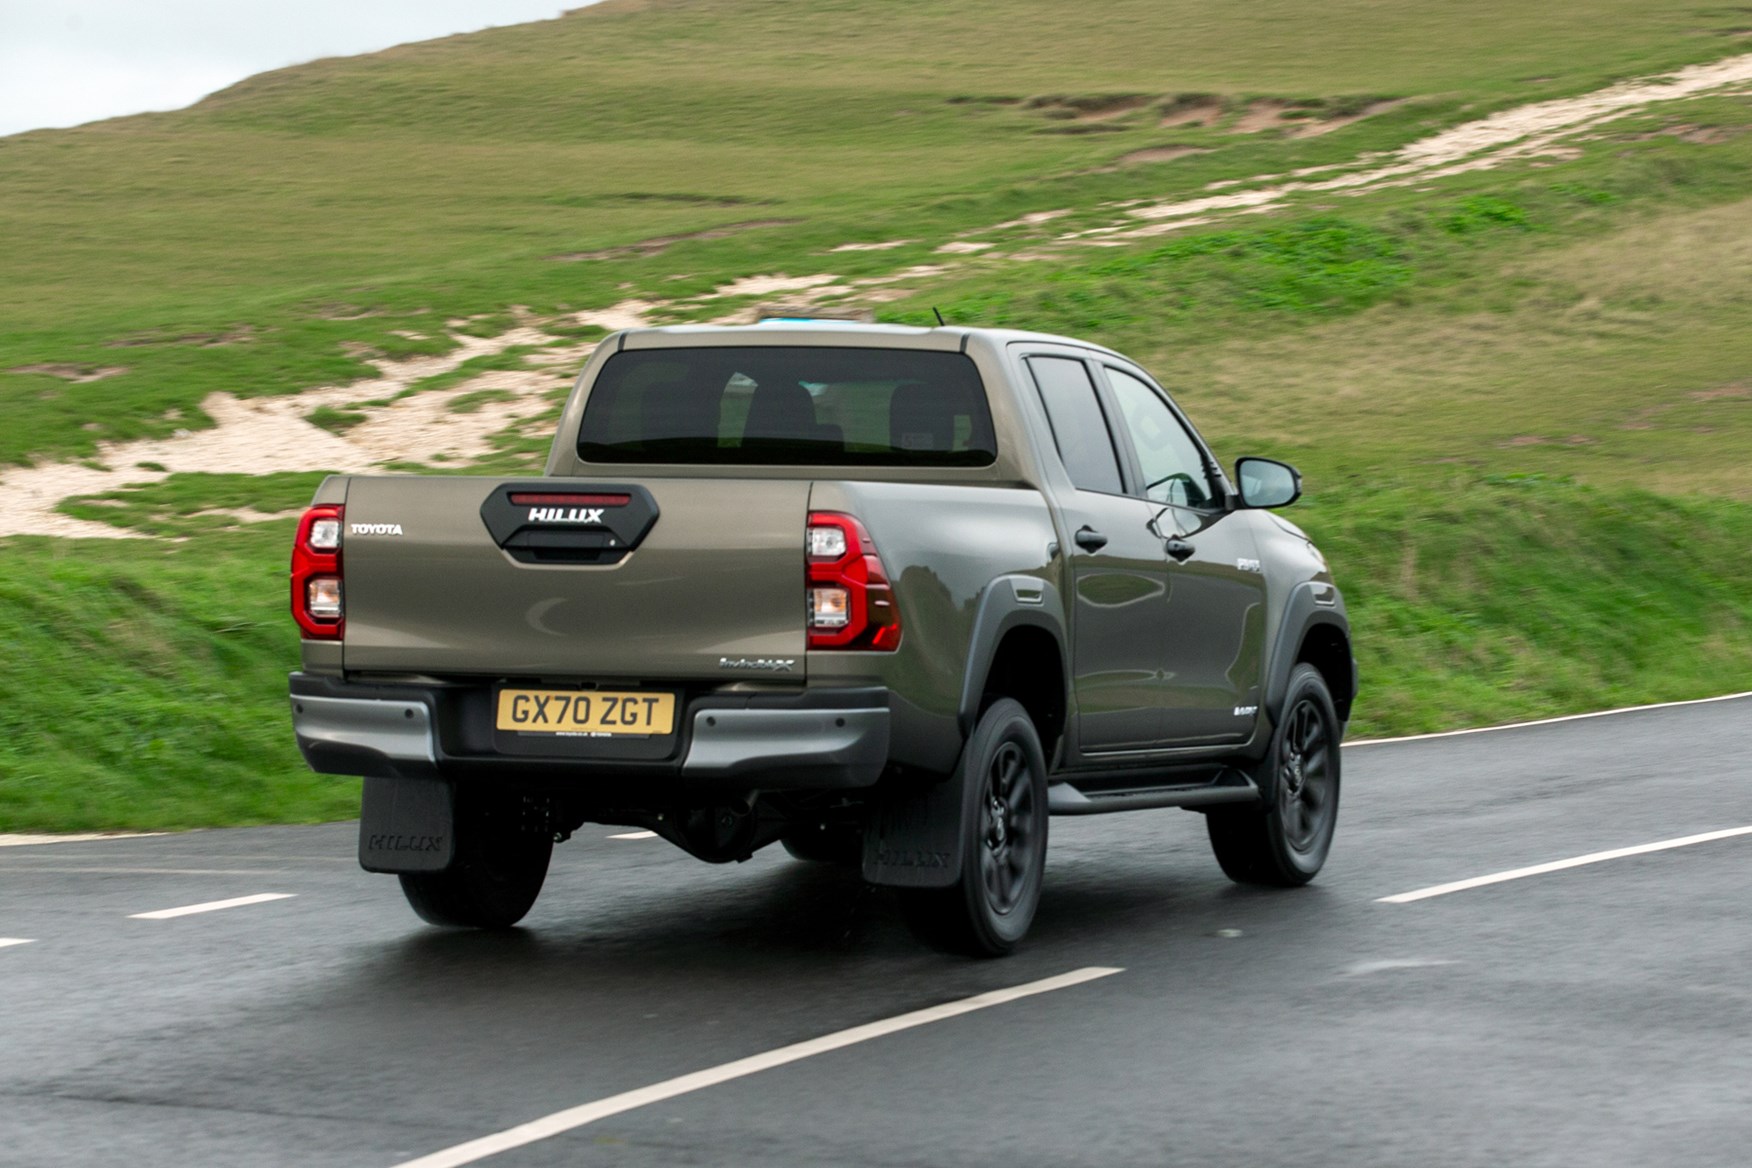 Toyota Hilux review, 2020 facelift, Invincible X, driving, rear view, bronze